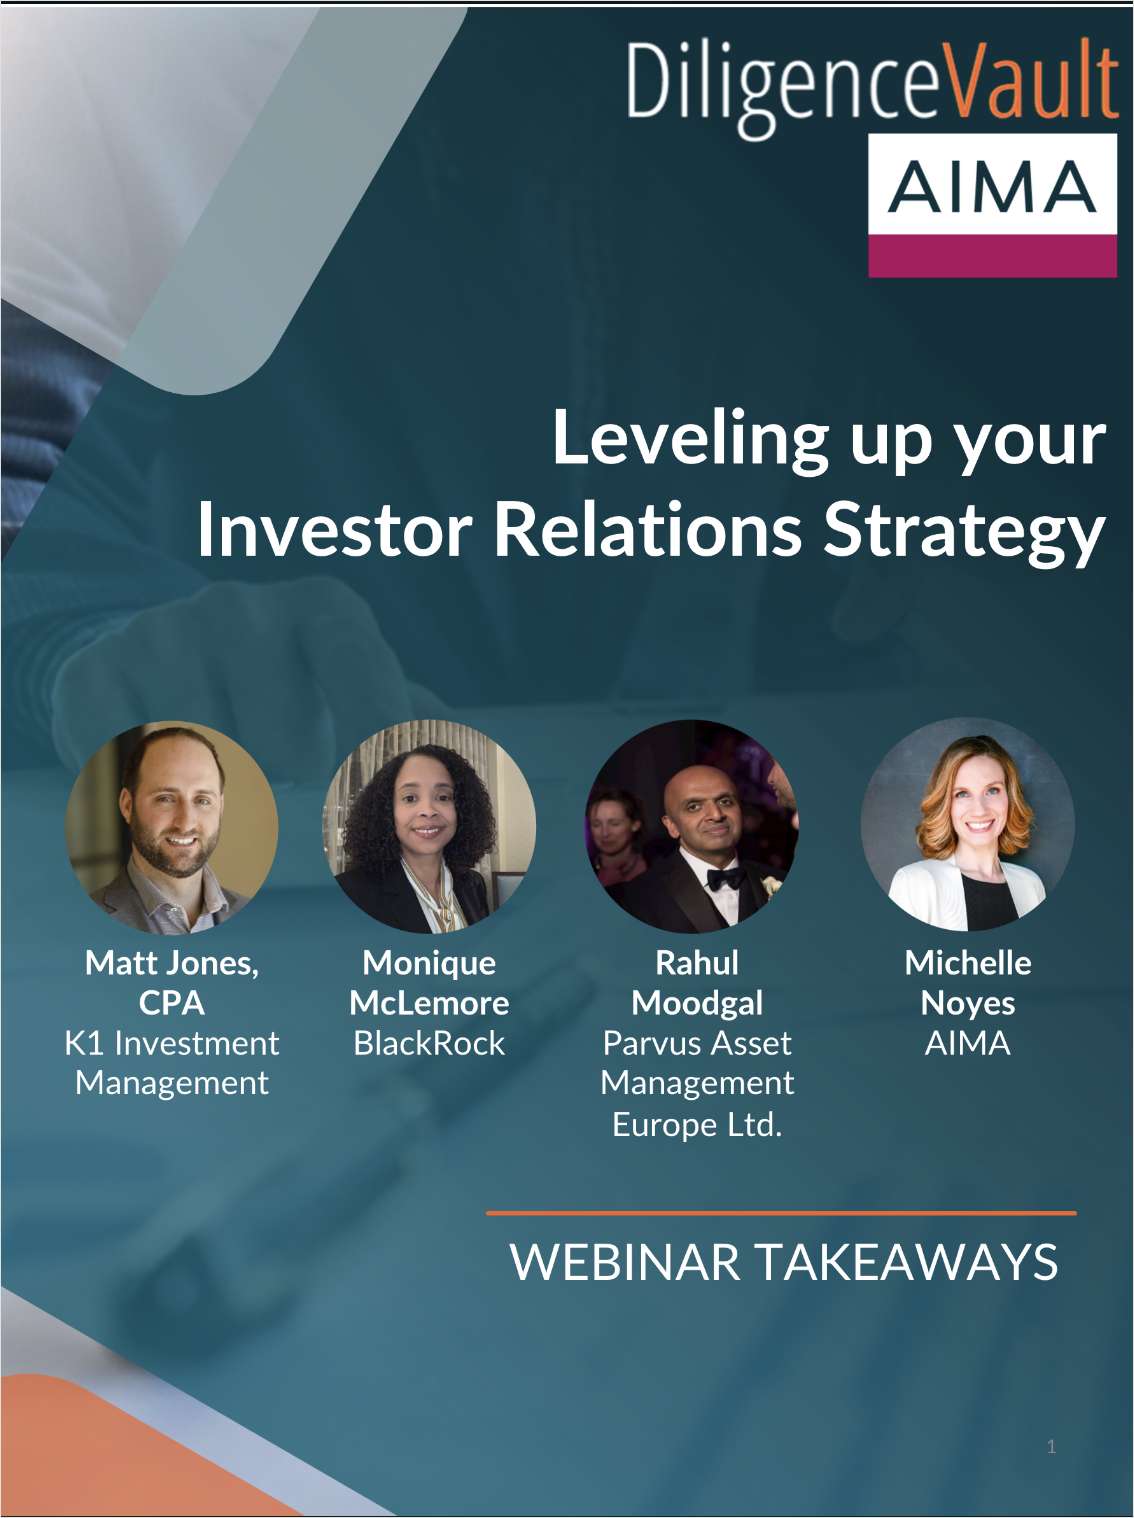 How to Level Up Your Investor Relations Strategy